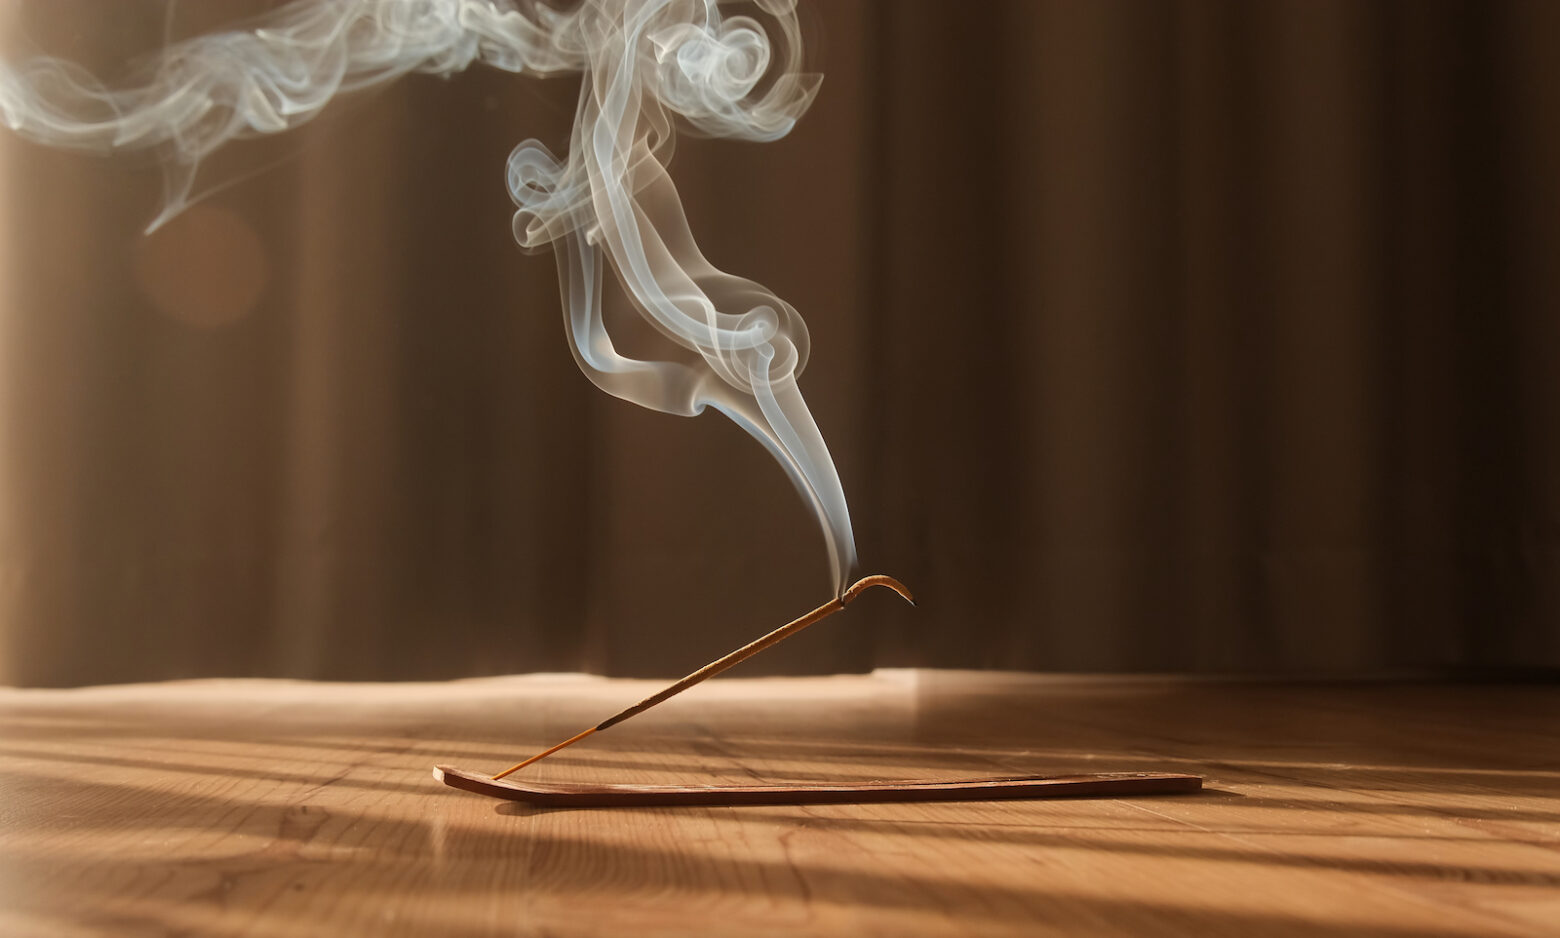 Burning aromatic incense smoky stick for meditation and relaxing.